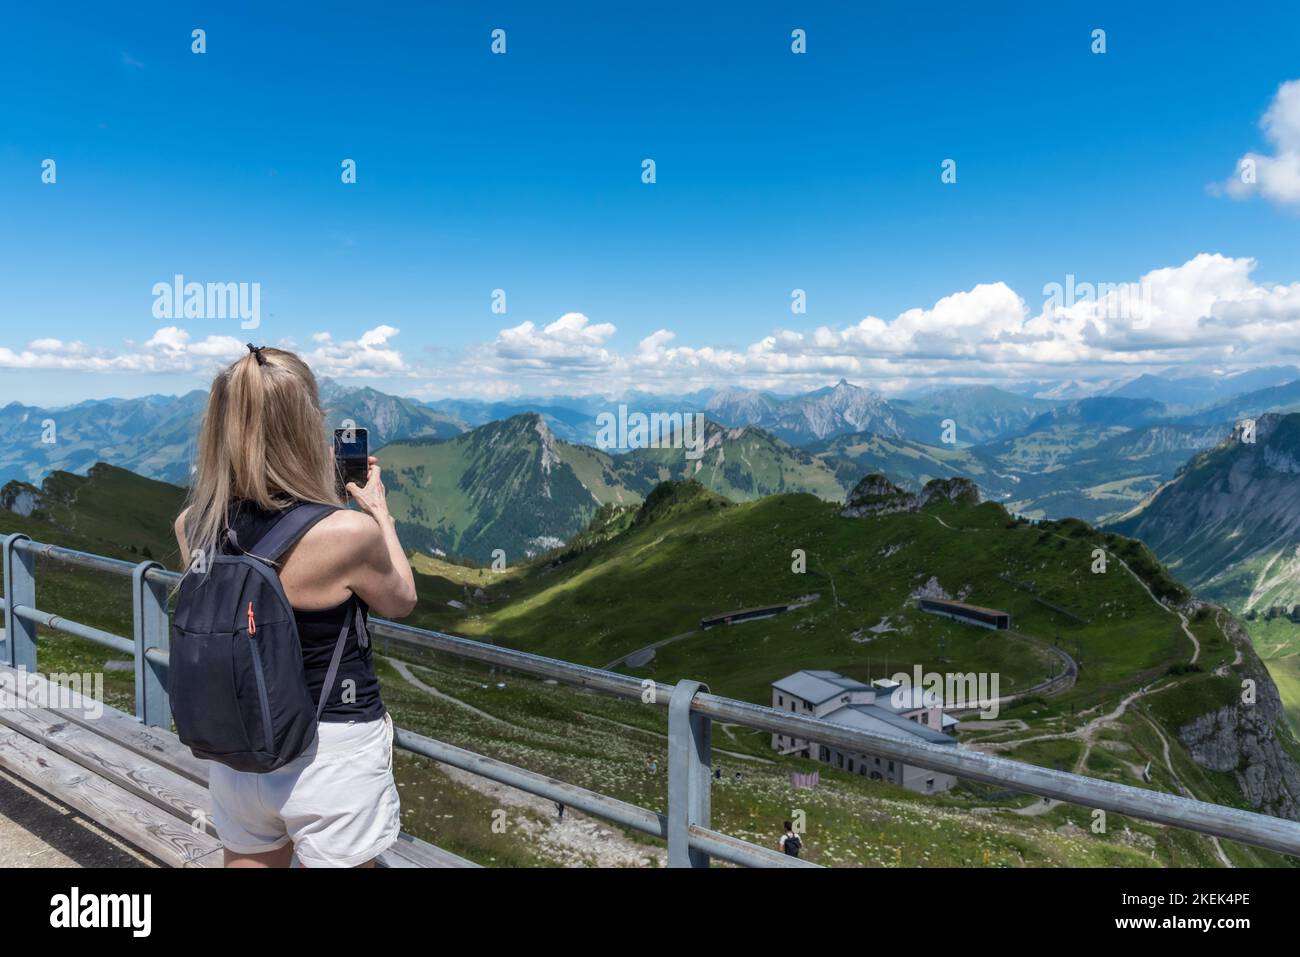 Mature adult blonde woman with backpack taking a photo of the Swiss Alps from a lookout point. Stock Photo